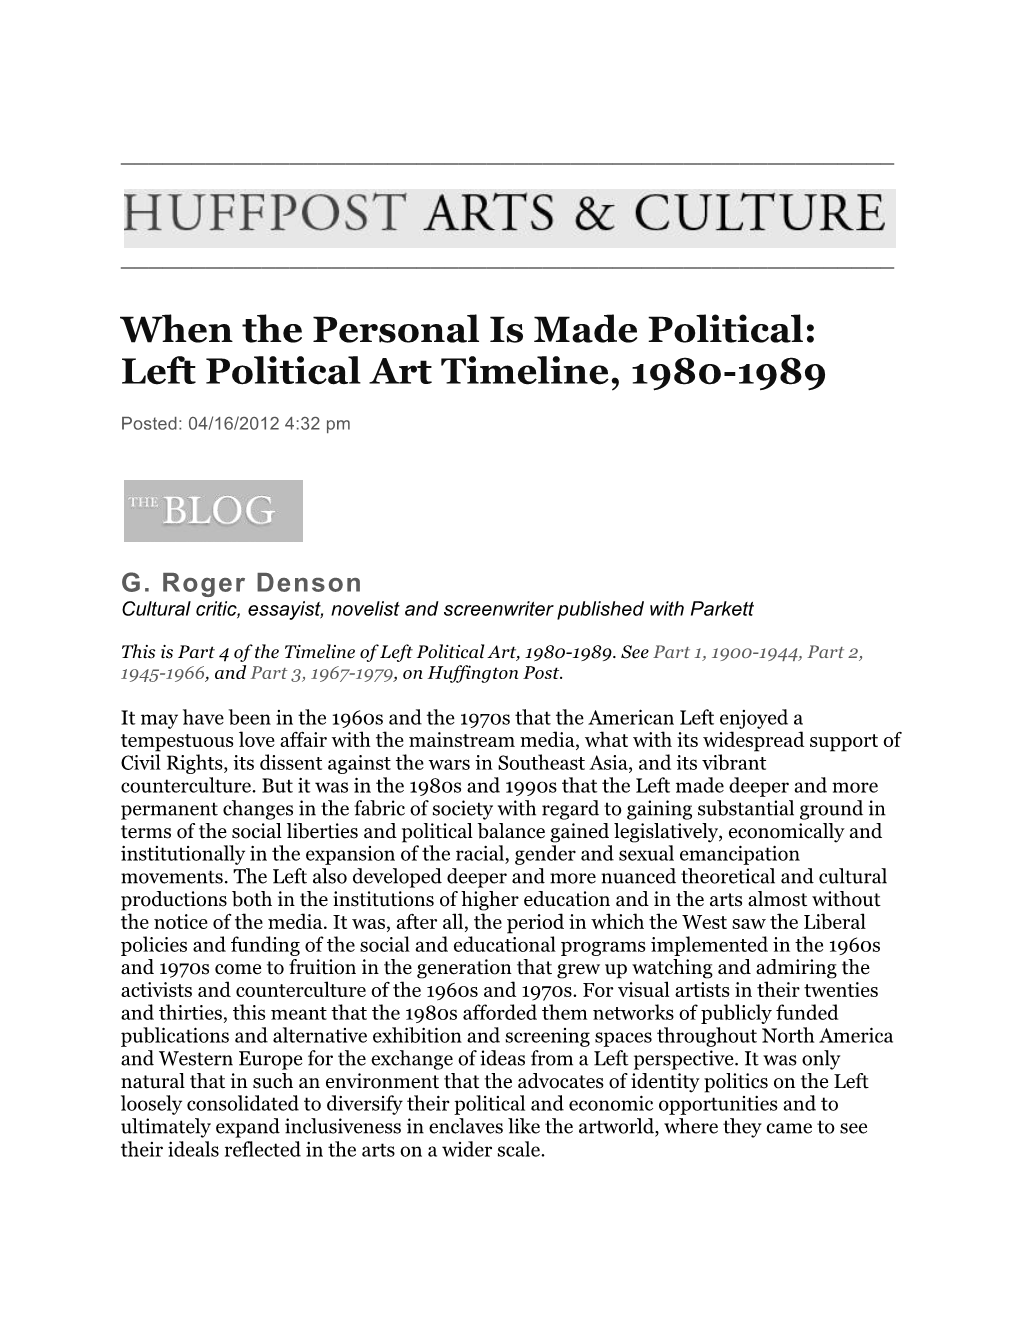 When the Personal Is Made Political: Left Political Art Timeline, 1980-1989